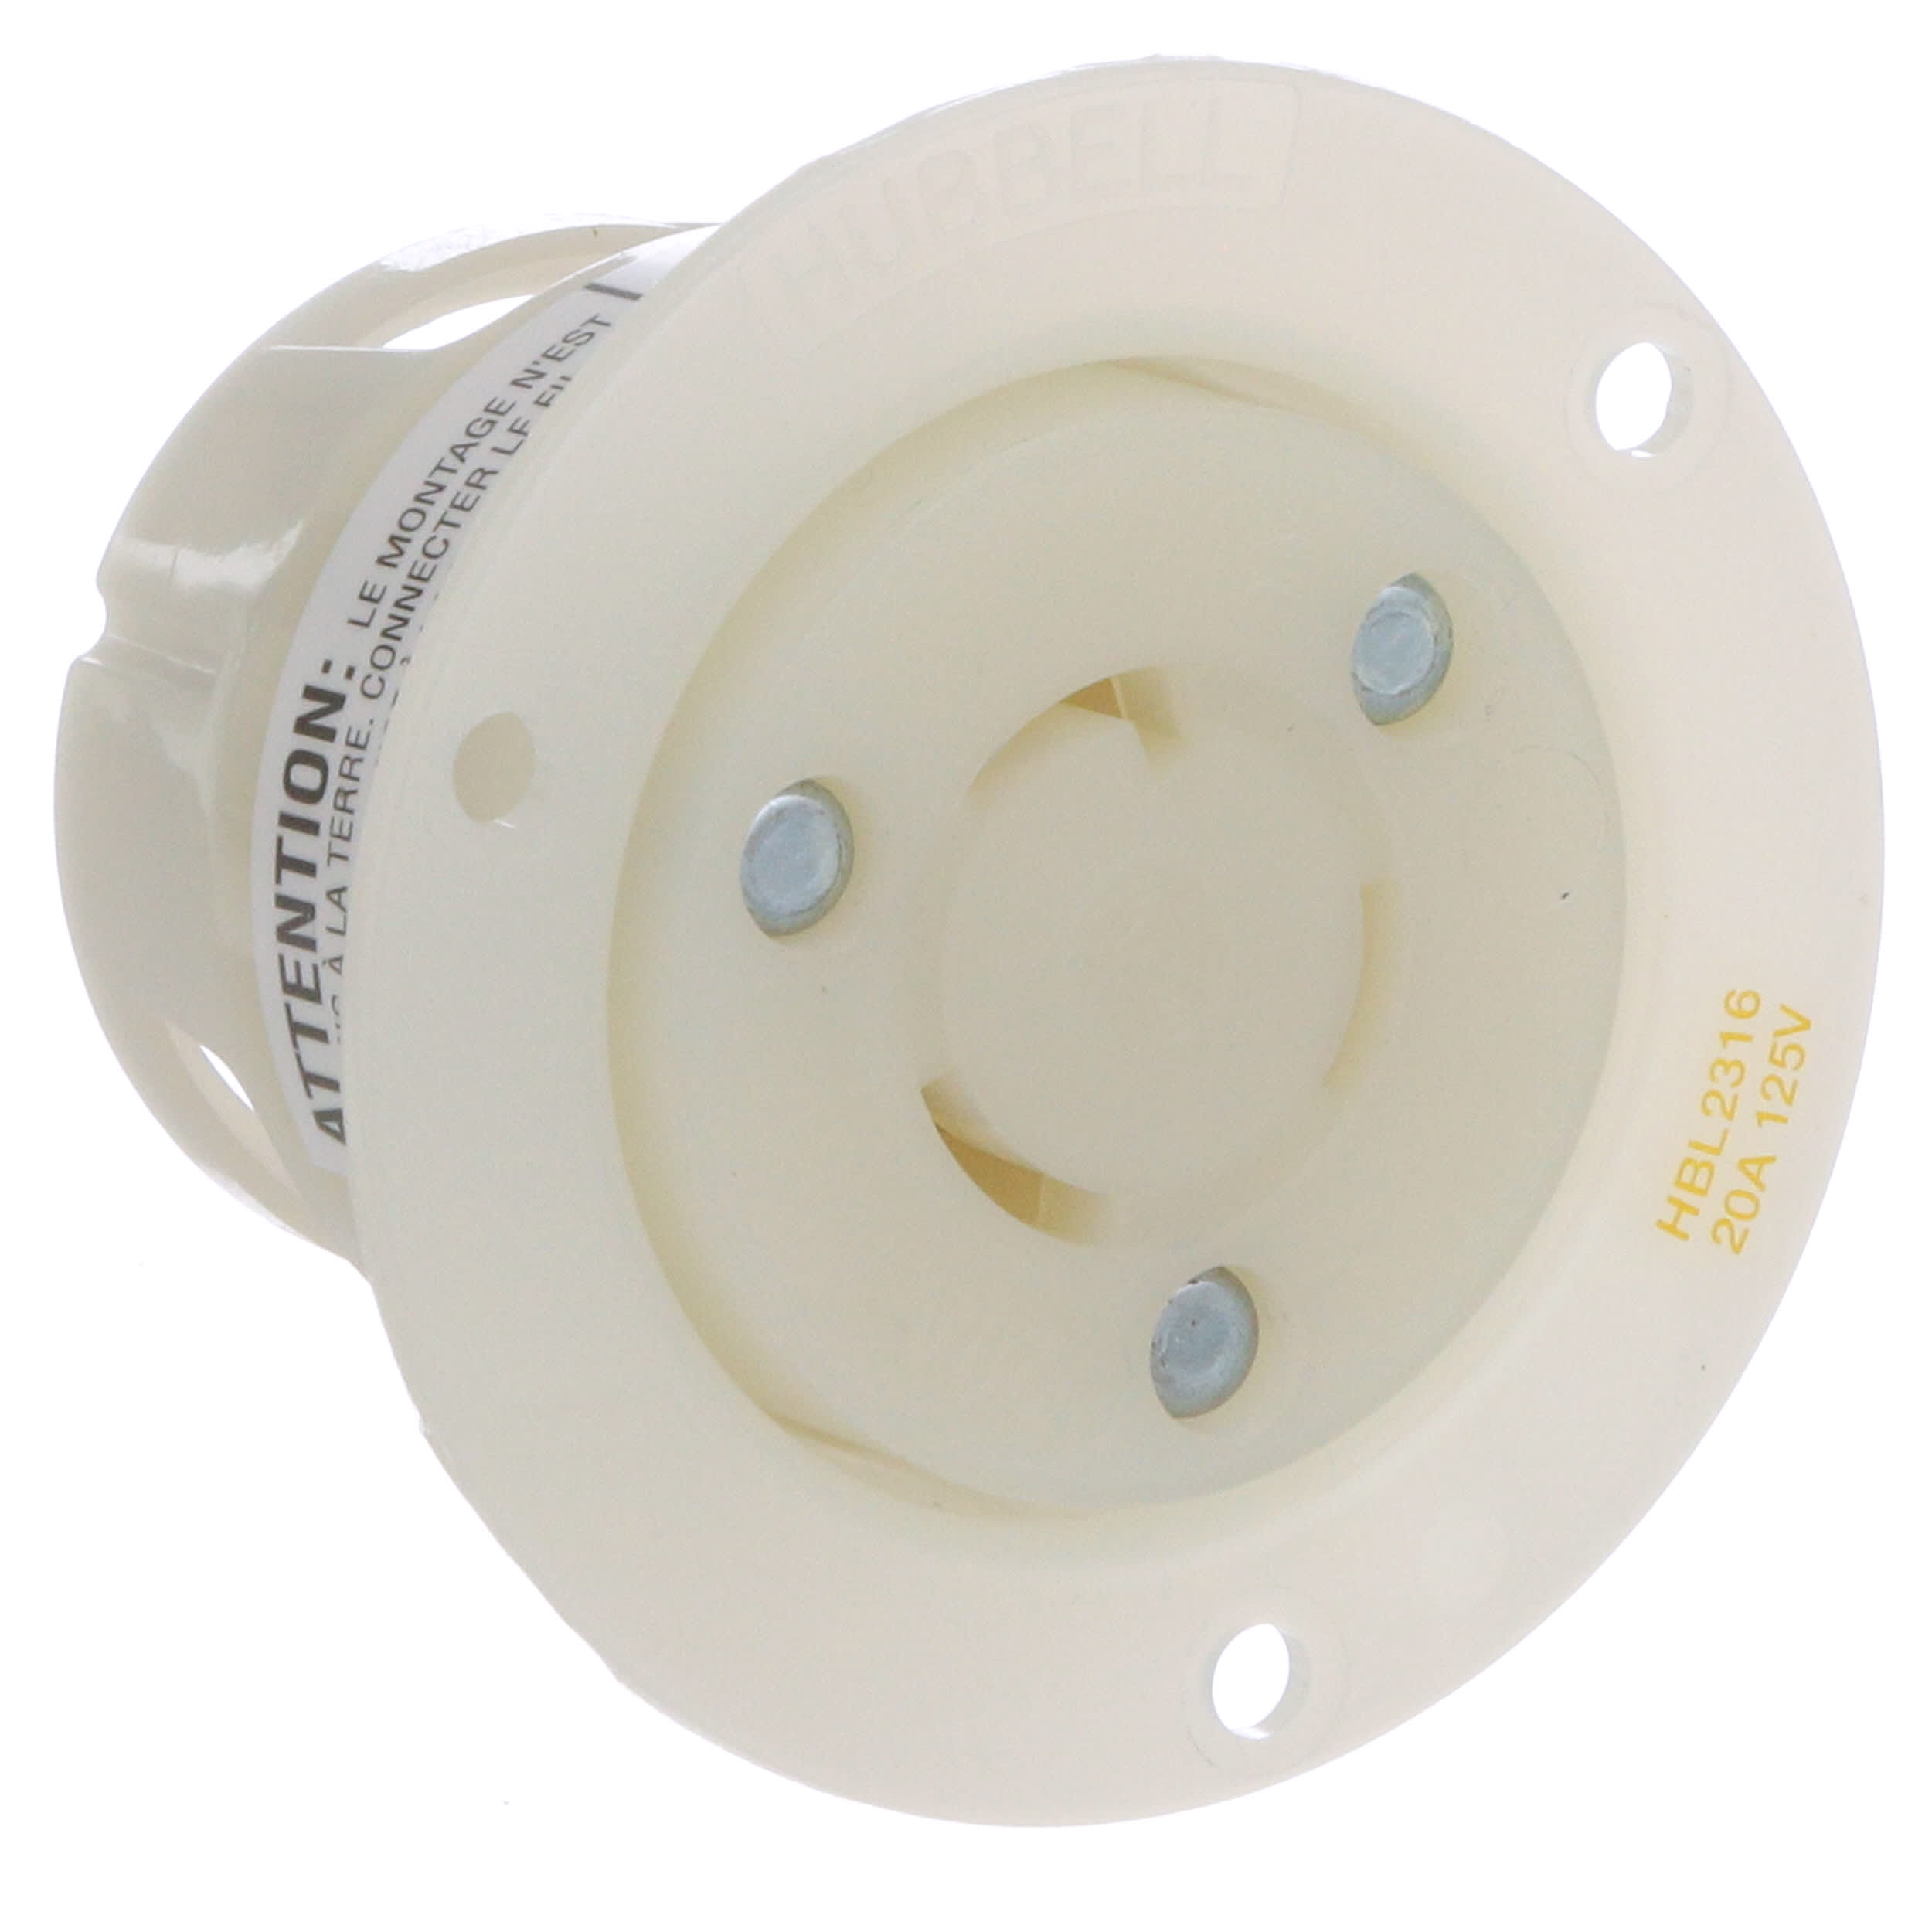 Hubbell HBL2316 Flanged Outlet NEMA L5-20 